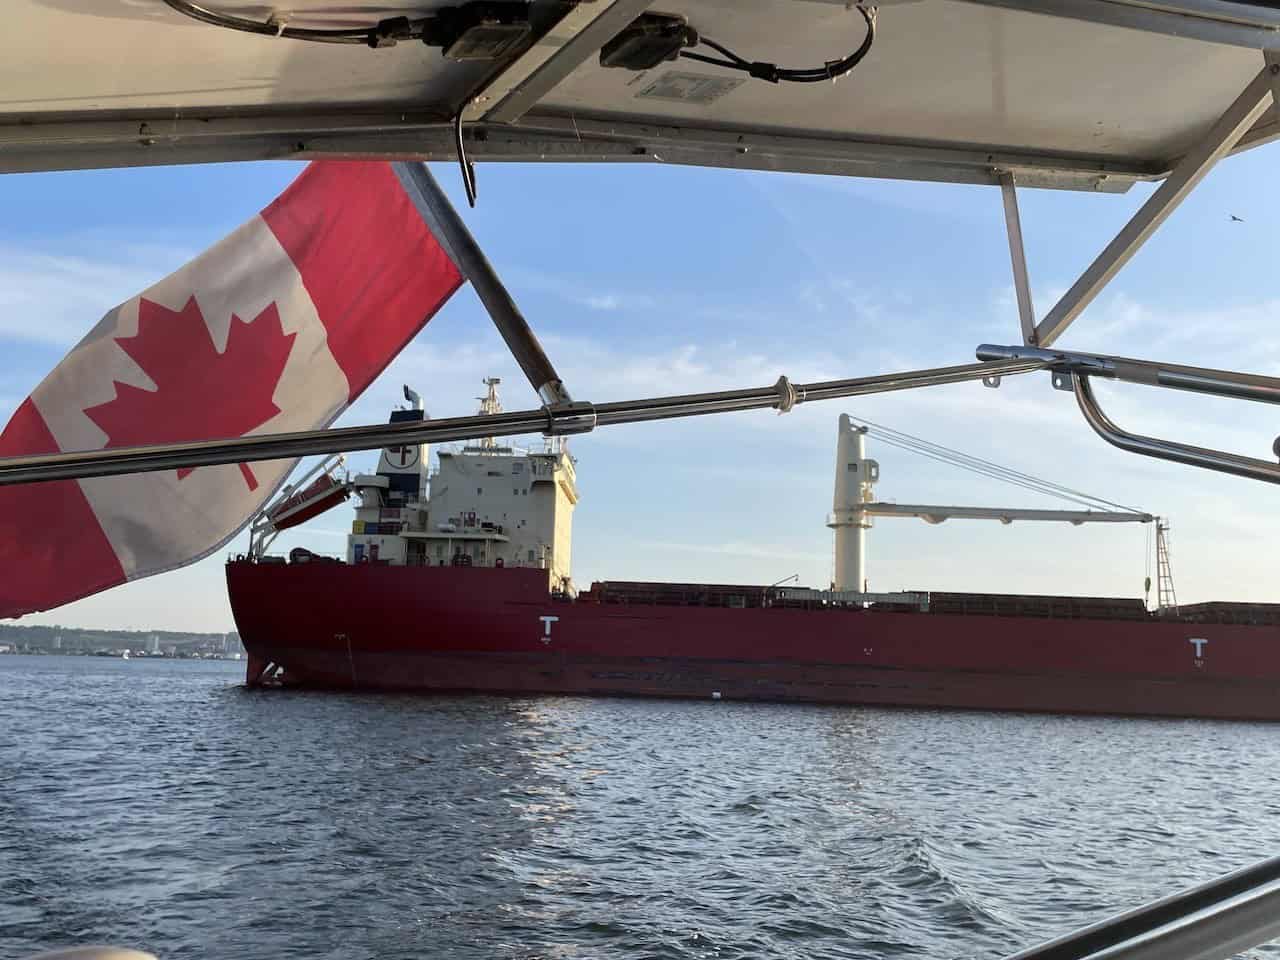 Hamilton Harbour Canada Flag on Sailboat - The Canada flag was prominently displayed on the back of the sailboat. The Canada flag is the flag of the country under which the sailboat is registered.